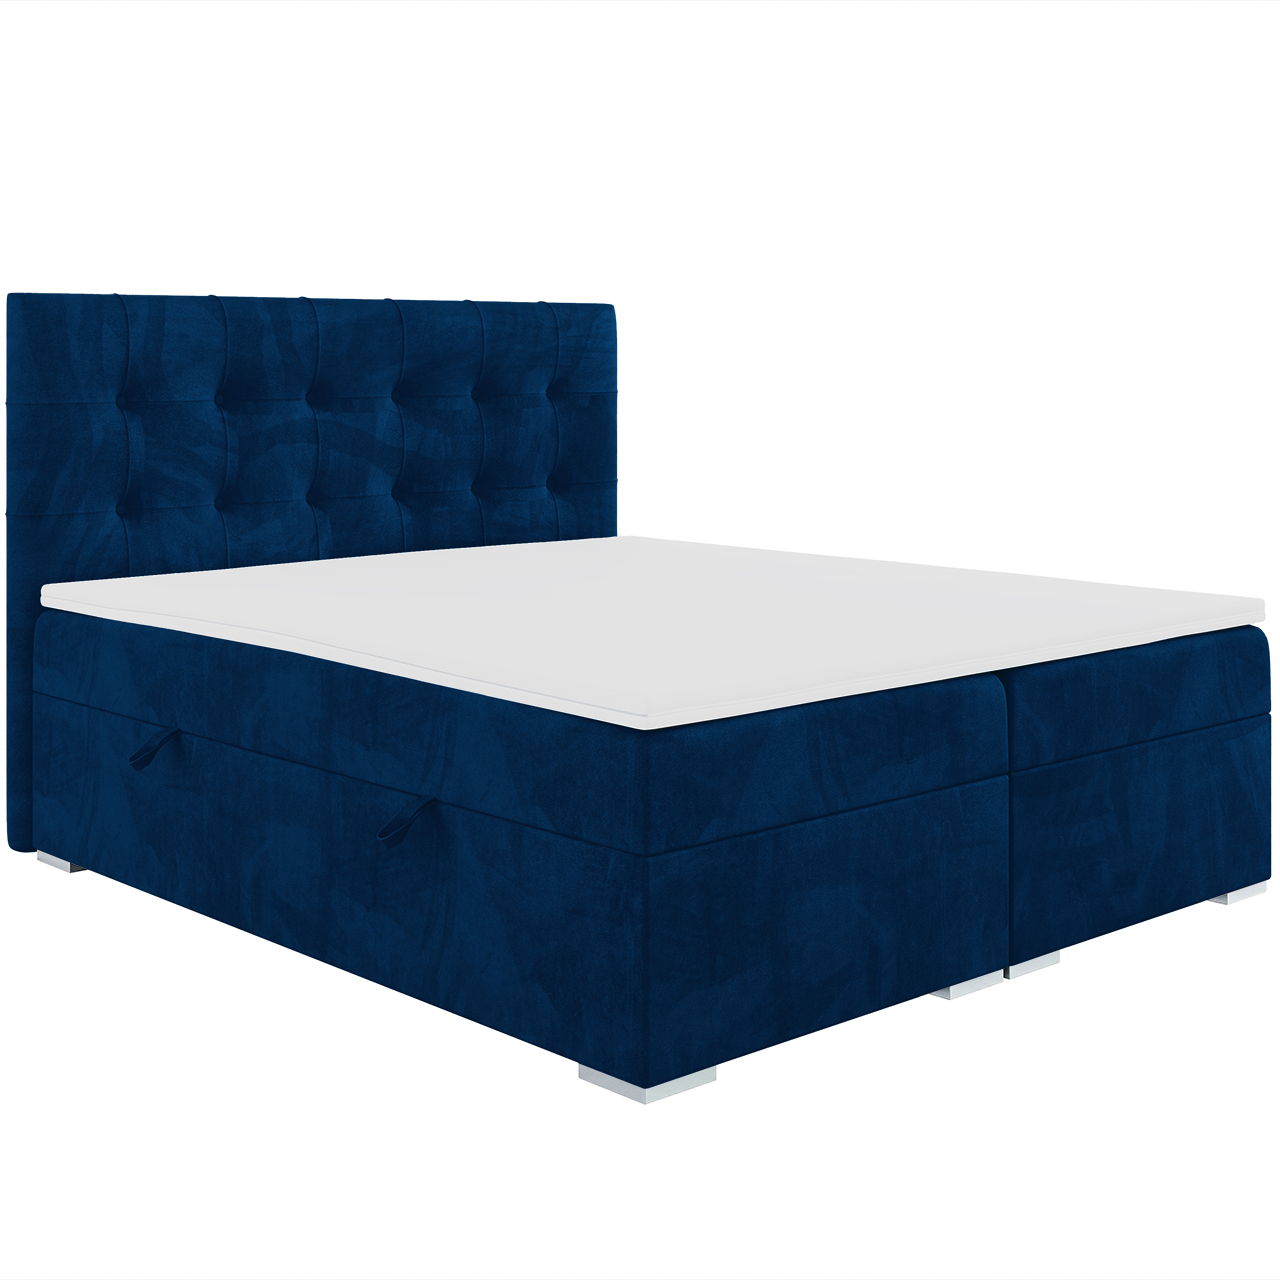 Upholstered bed CARLO 160x200 riviera 81